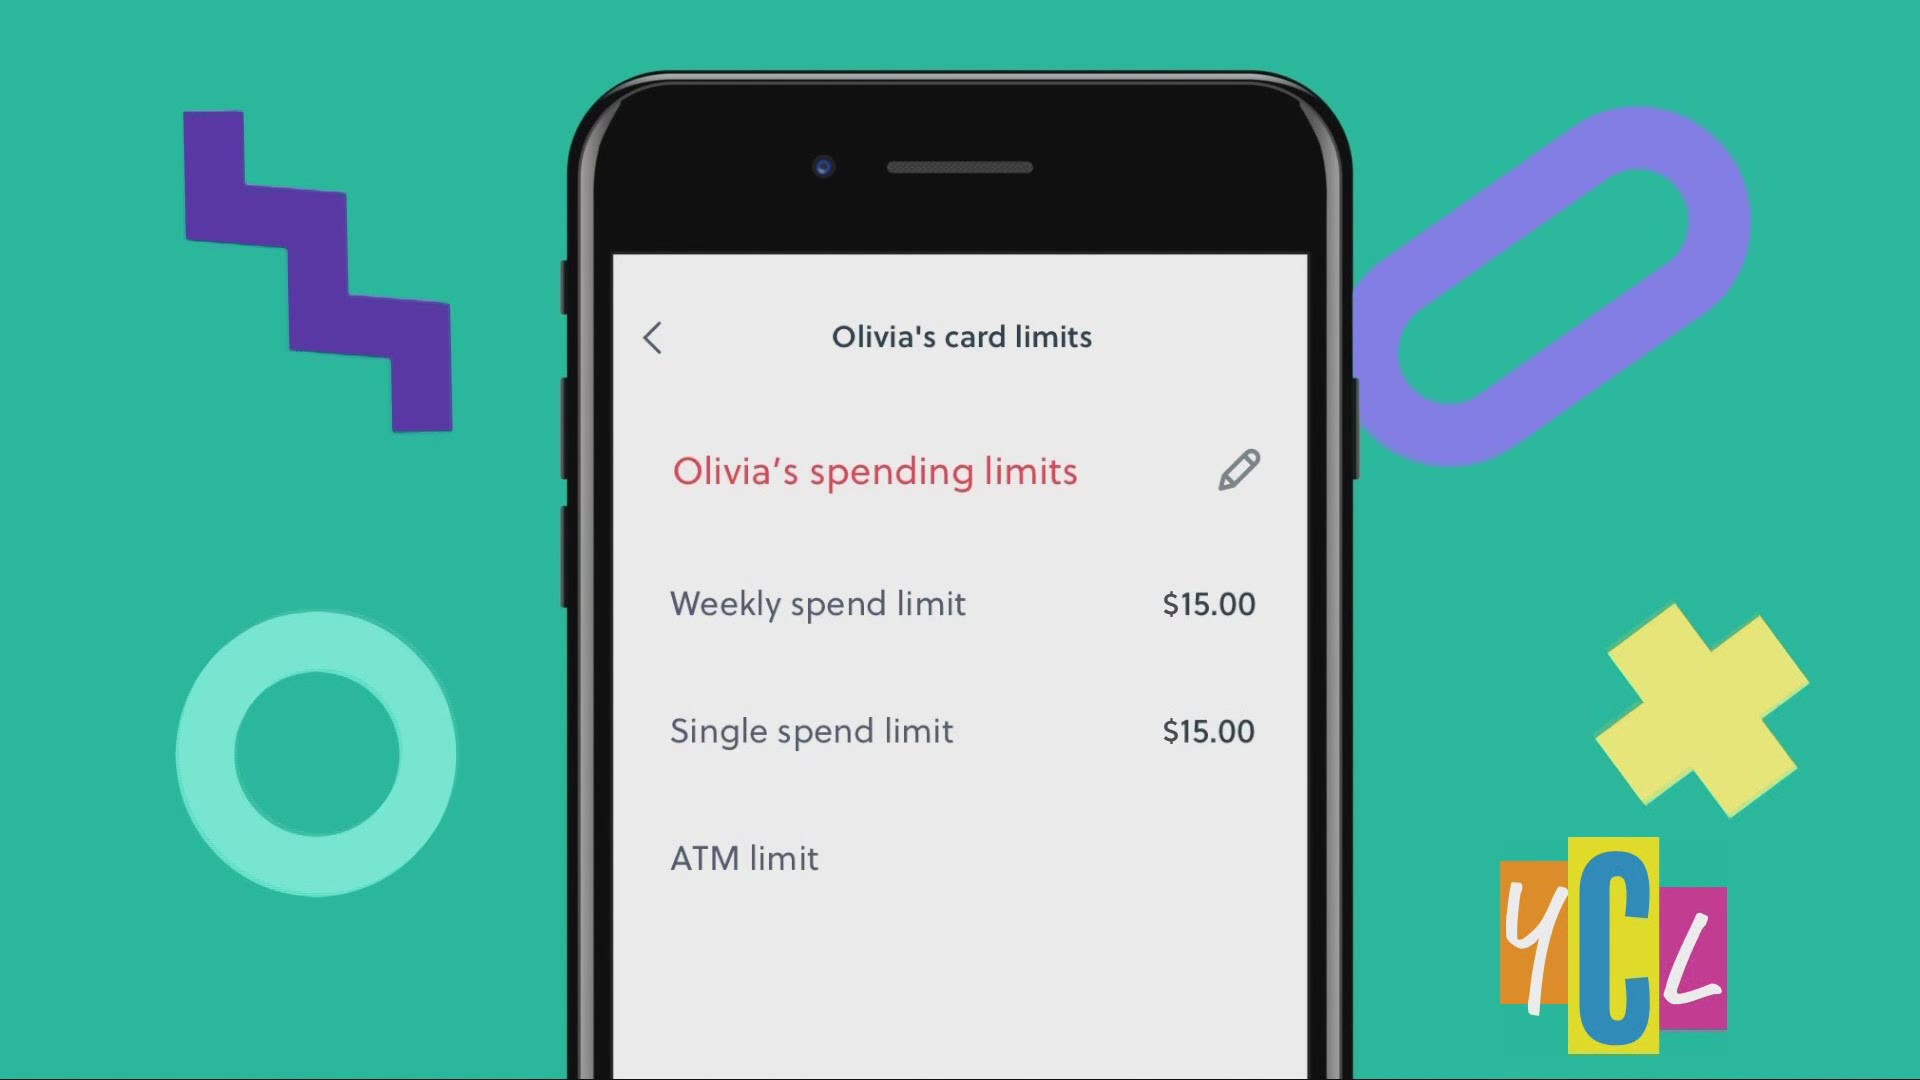 gohenry is a debit card (Mastercard) and app with unique parental controls for young people aged 6 to 18.